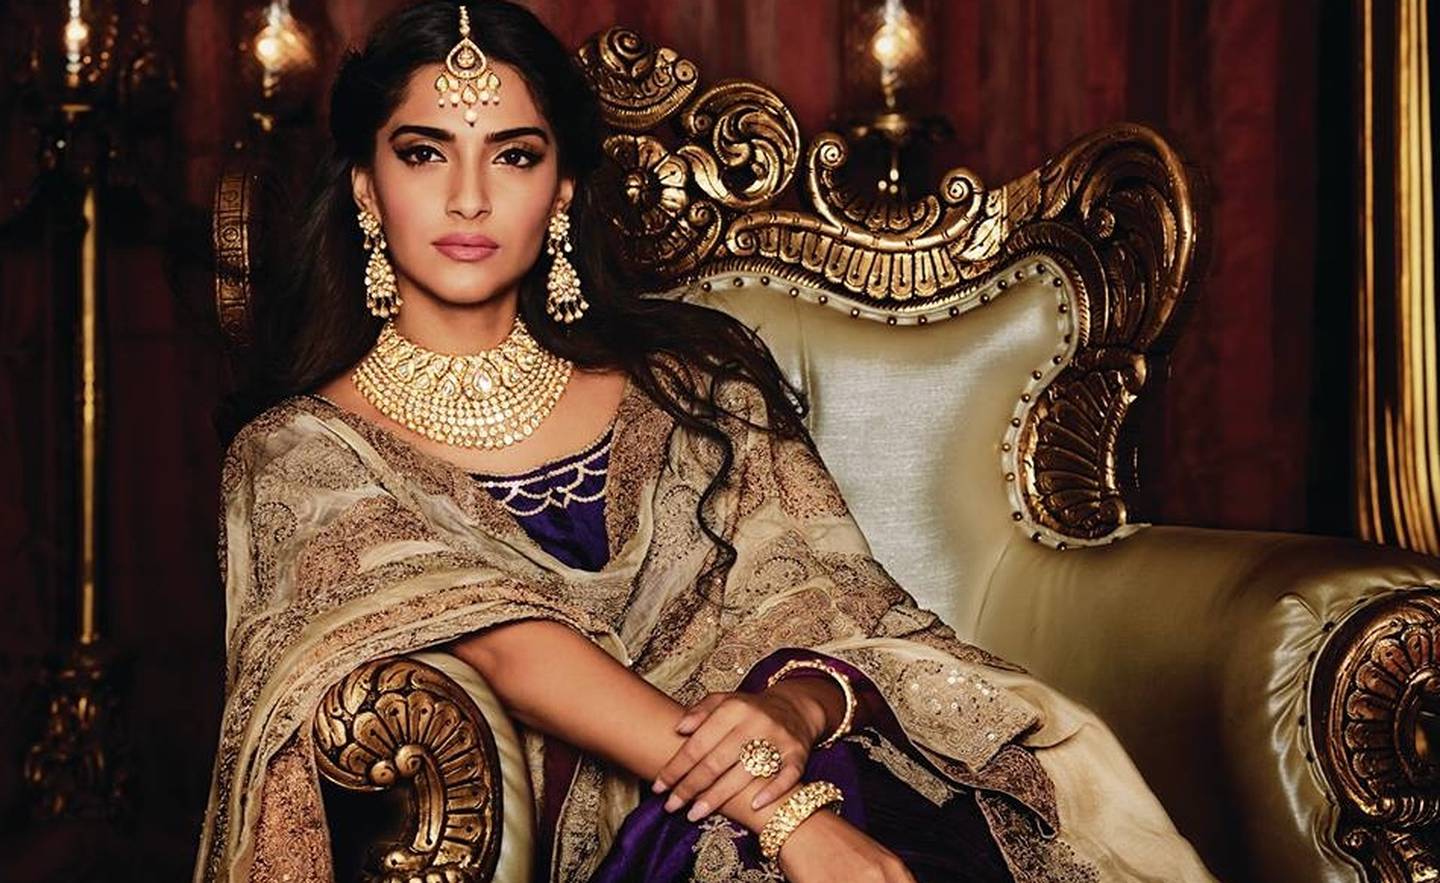 Sonam Kapoor in a campaign image for Kalyan Jewellers.